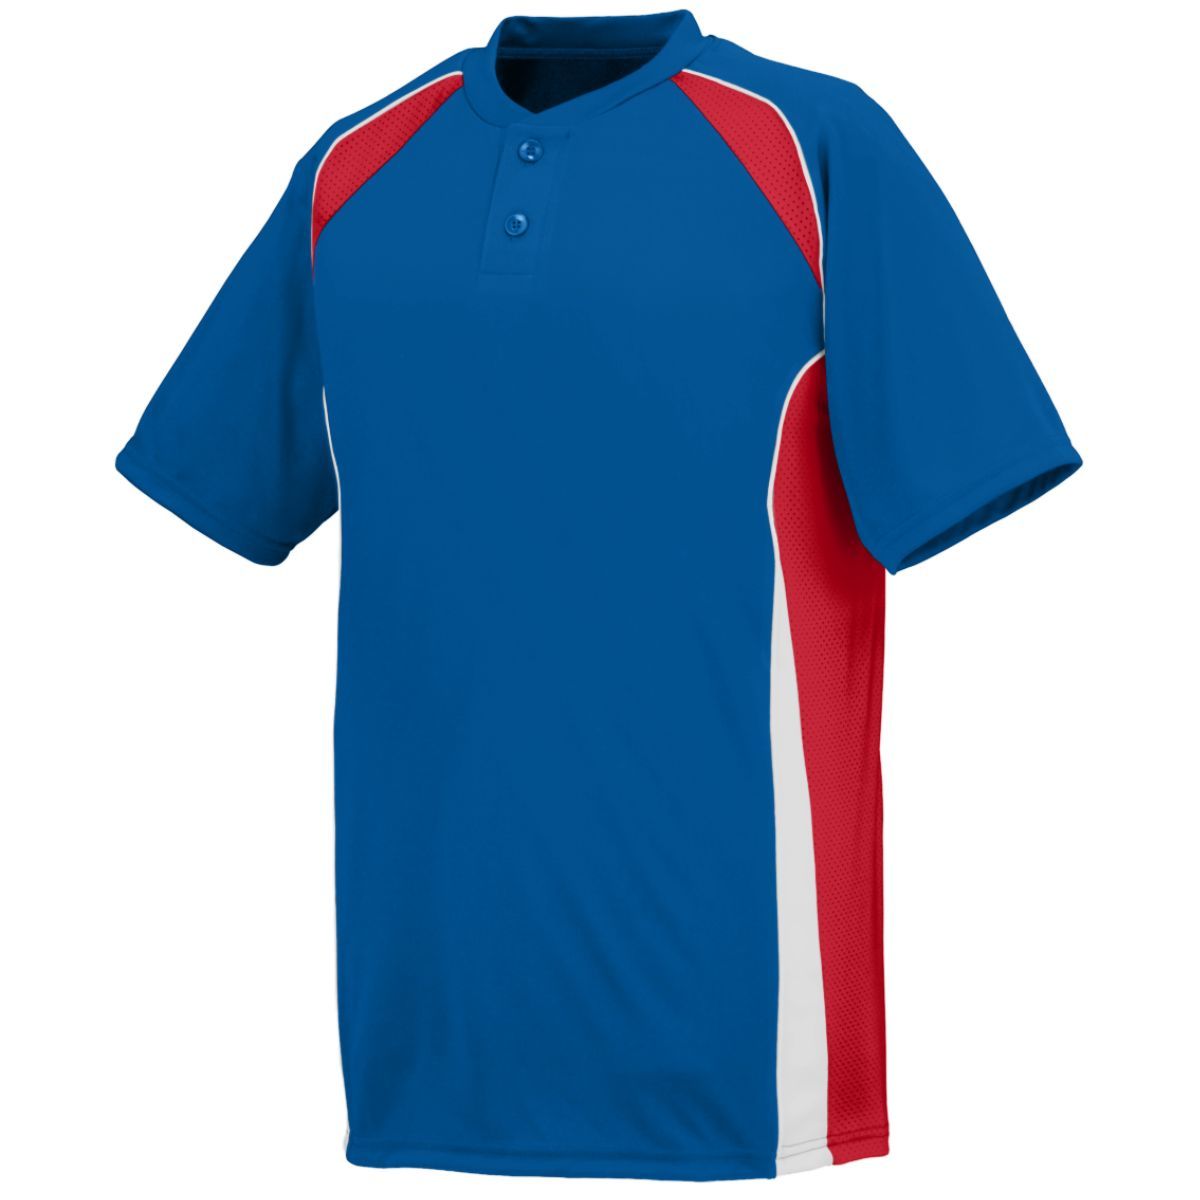 Augusta Sportswear Base Hit Jersey in Royal/Red/White  -Part of the Adult, Adult-Jersey, Augusta-Products, Baseball, Shirts, All-Sports, All-Sports-1 product lines at KanaleyCreations.com